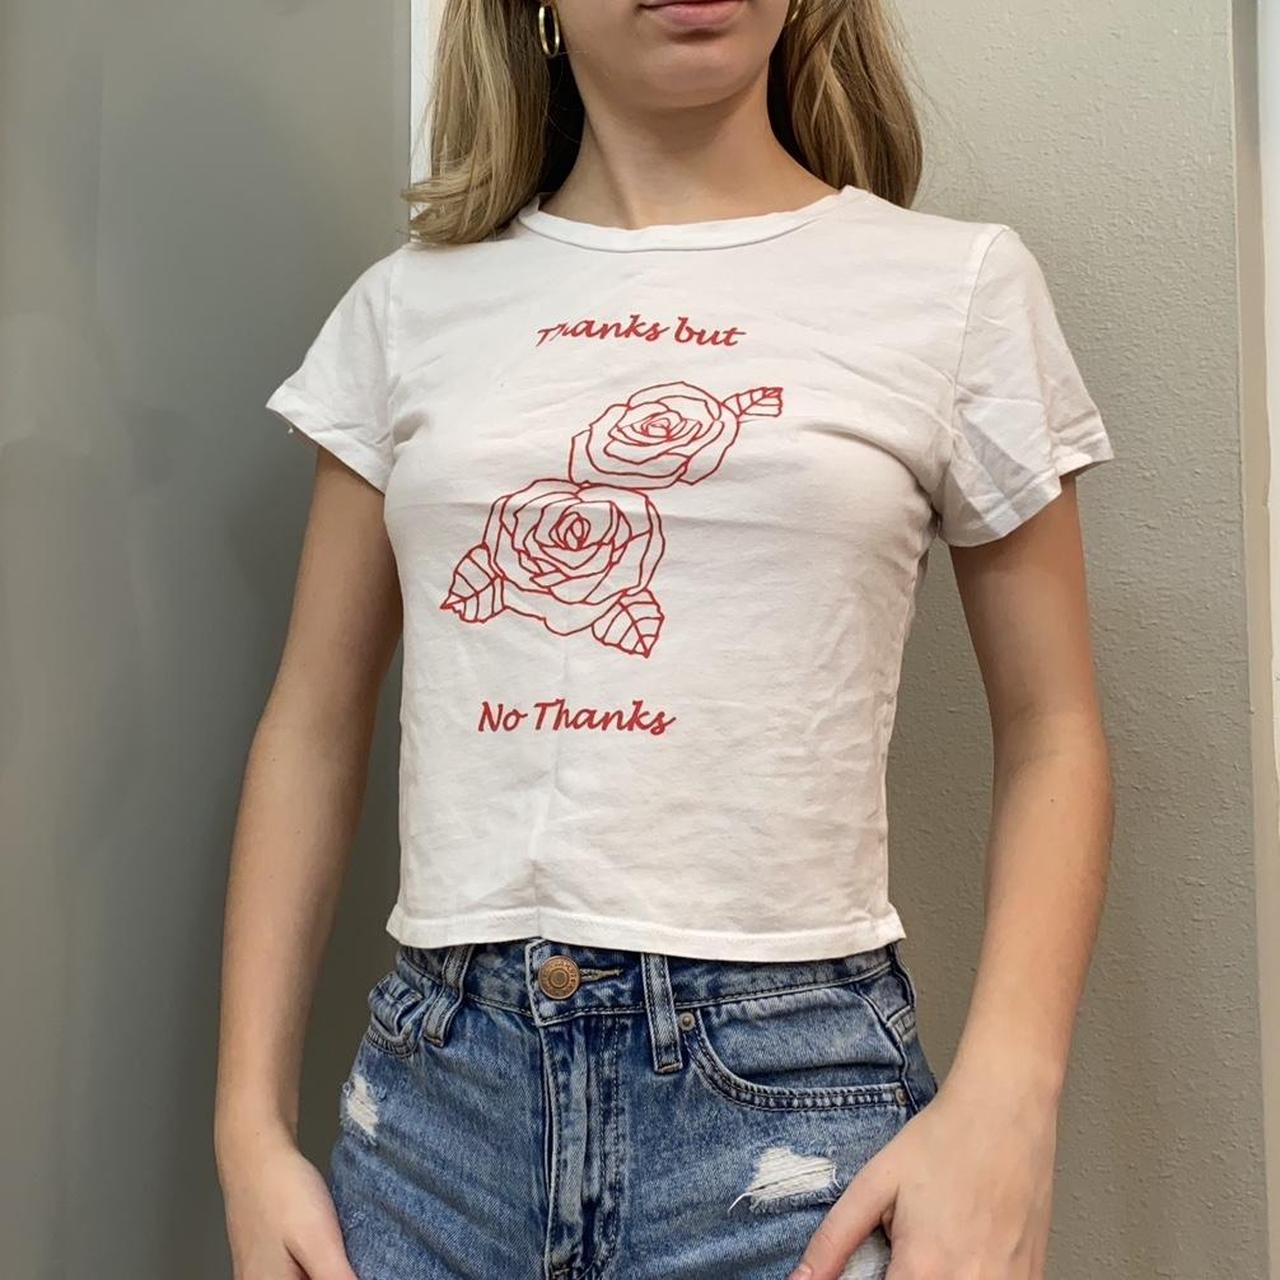 red and green mexico baby tee shipping is free fits - Depop